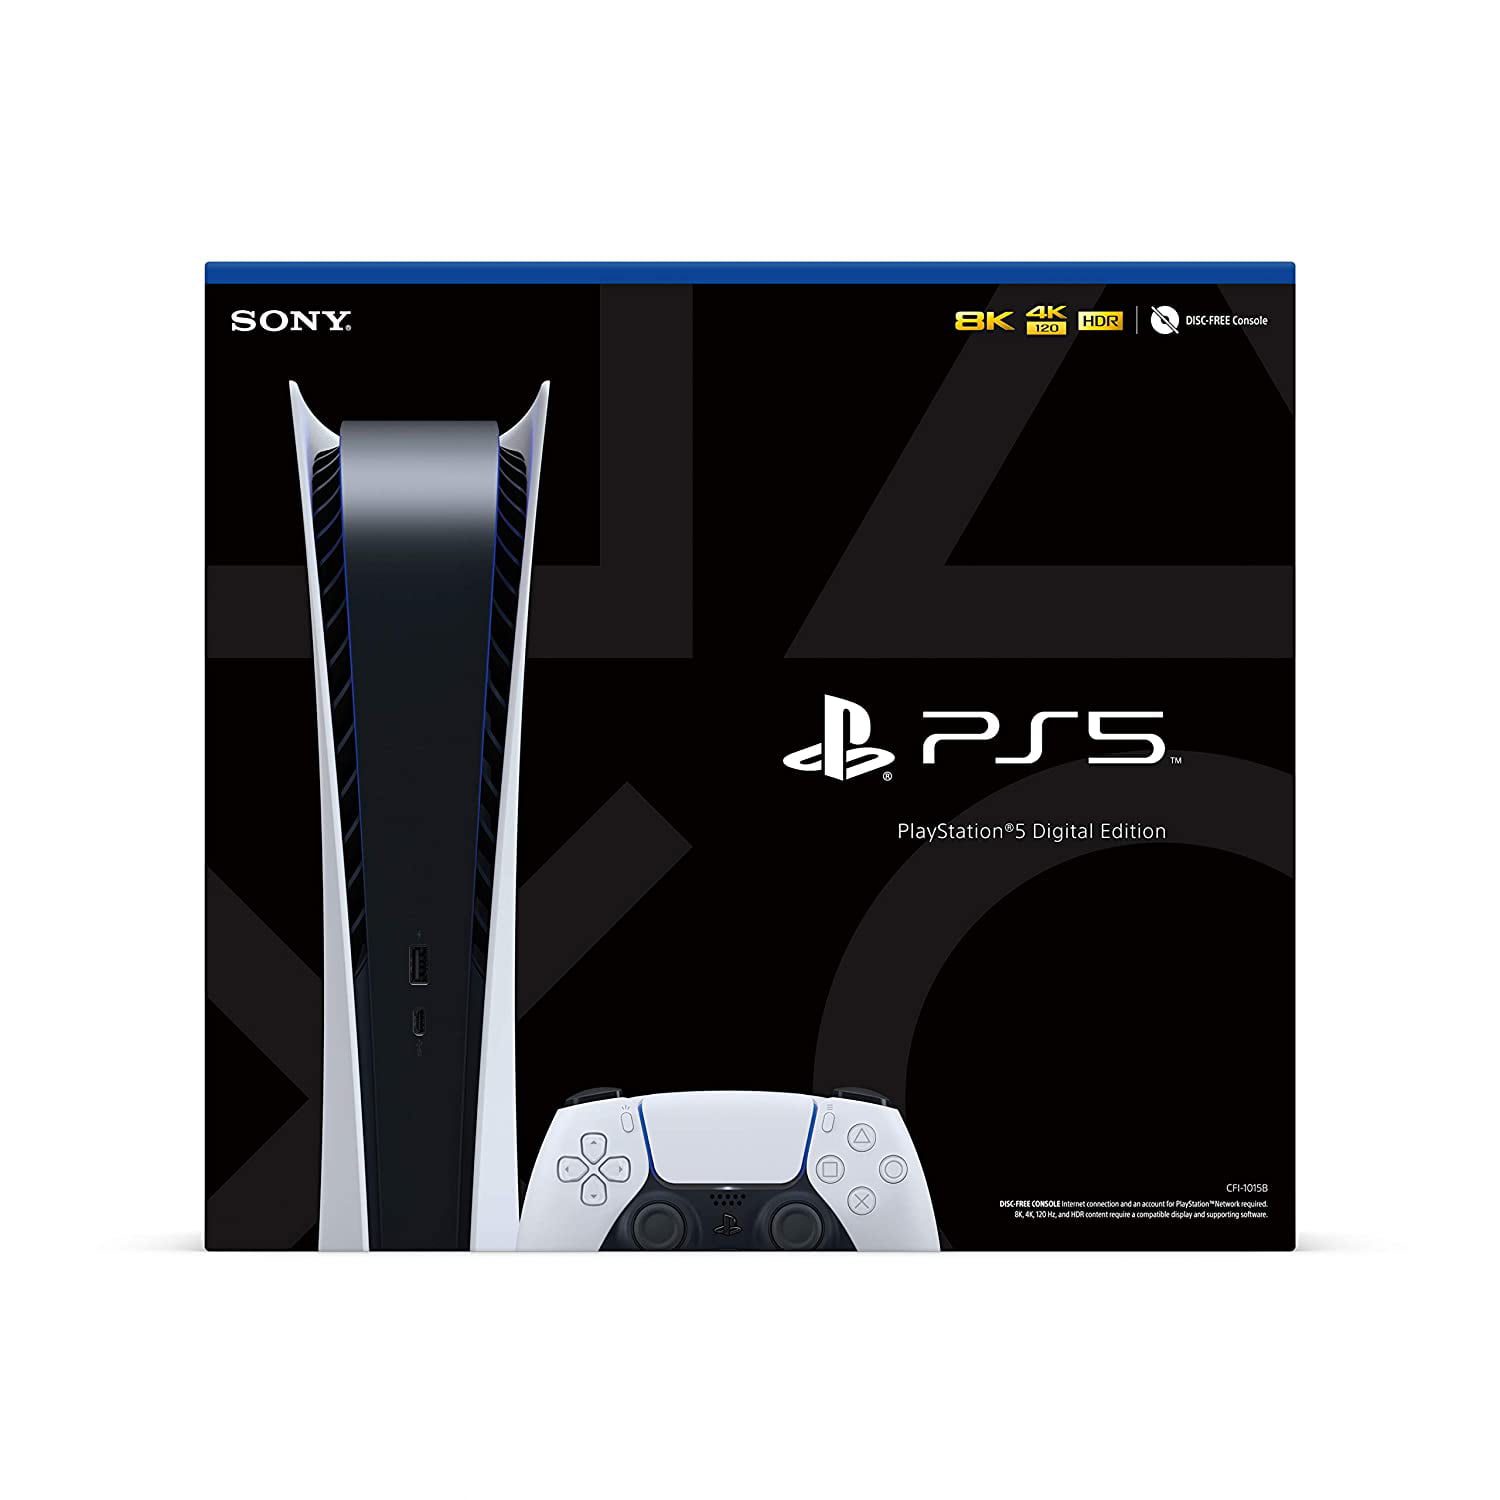 Sony PS5 Digital Edition Video Game Console